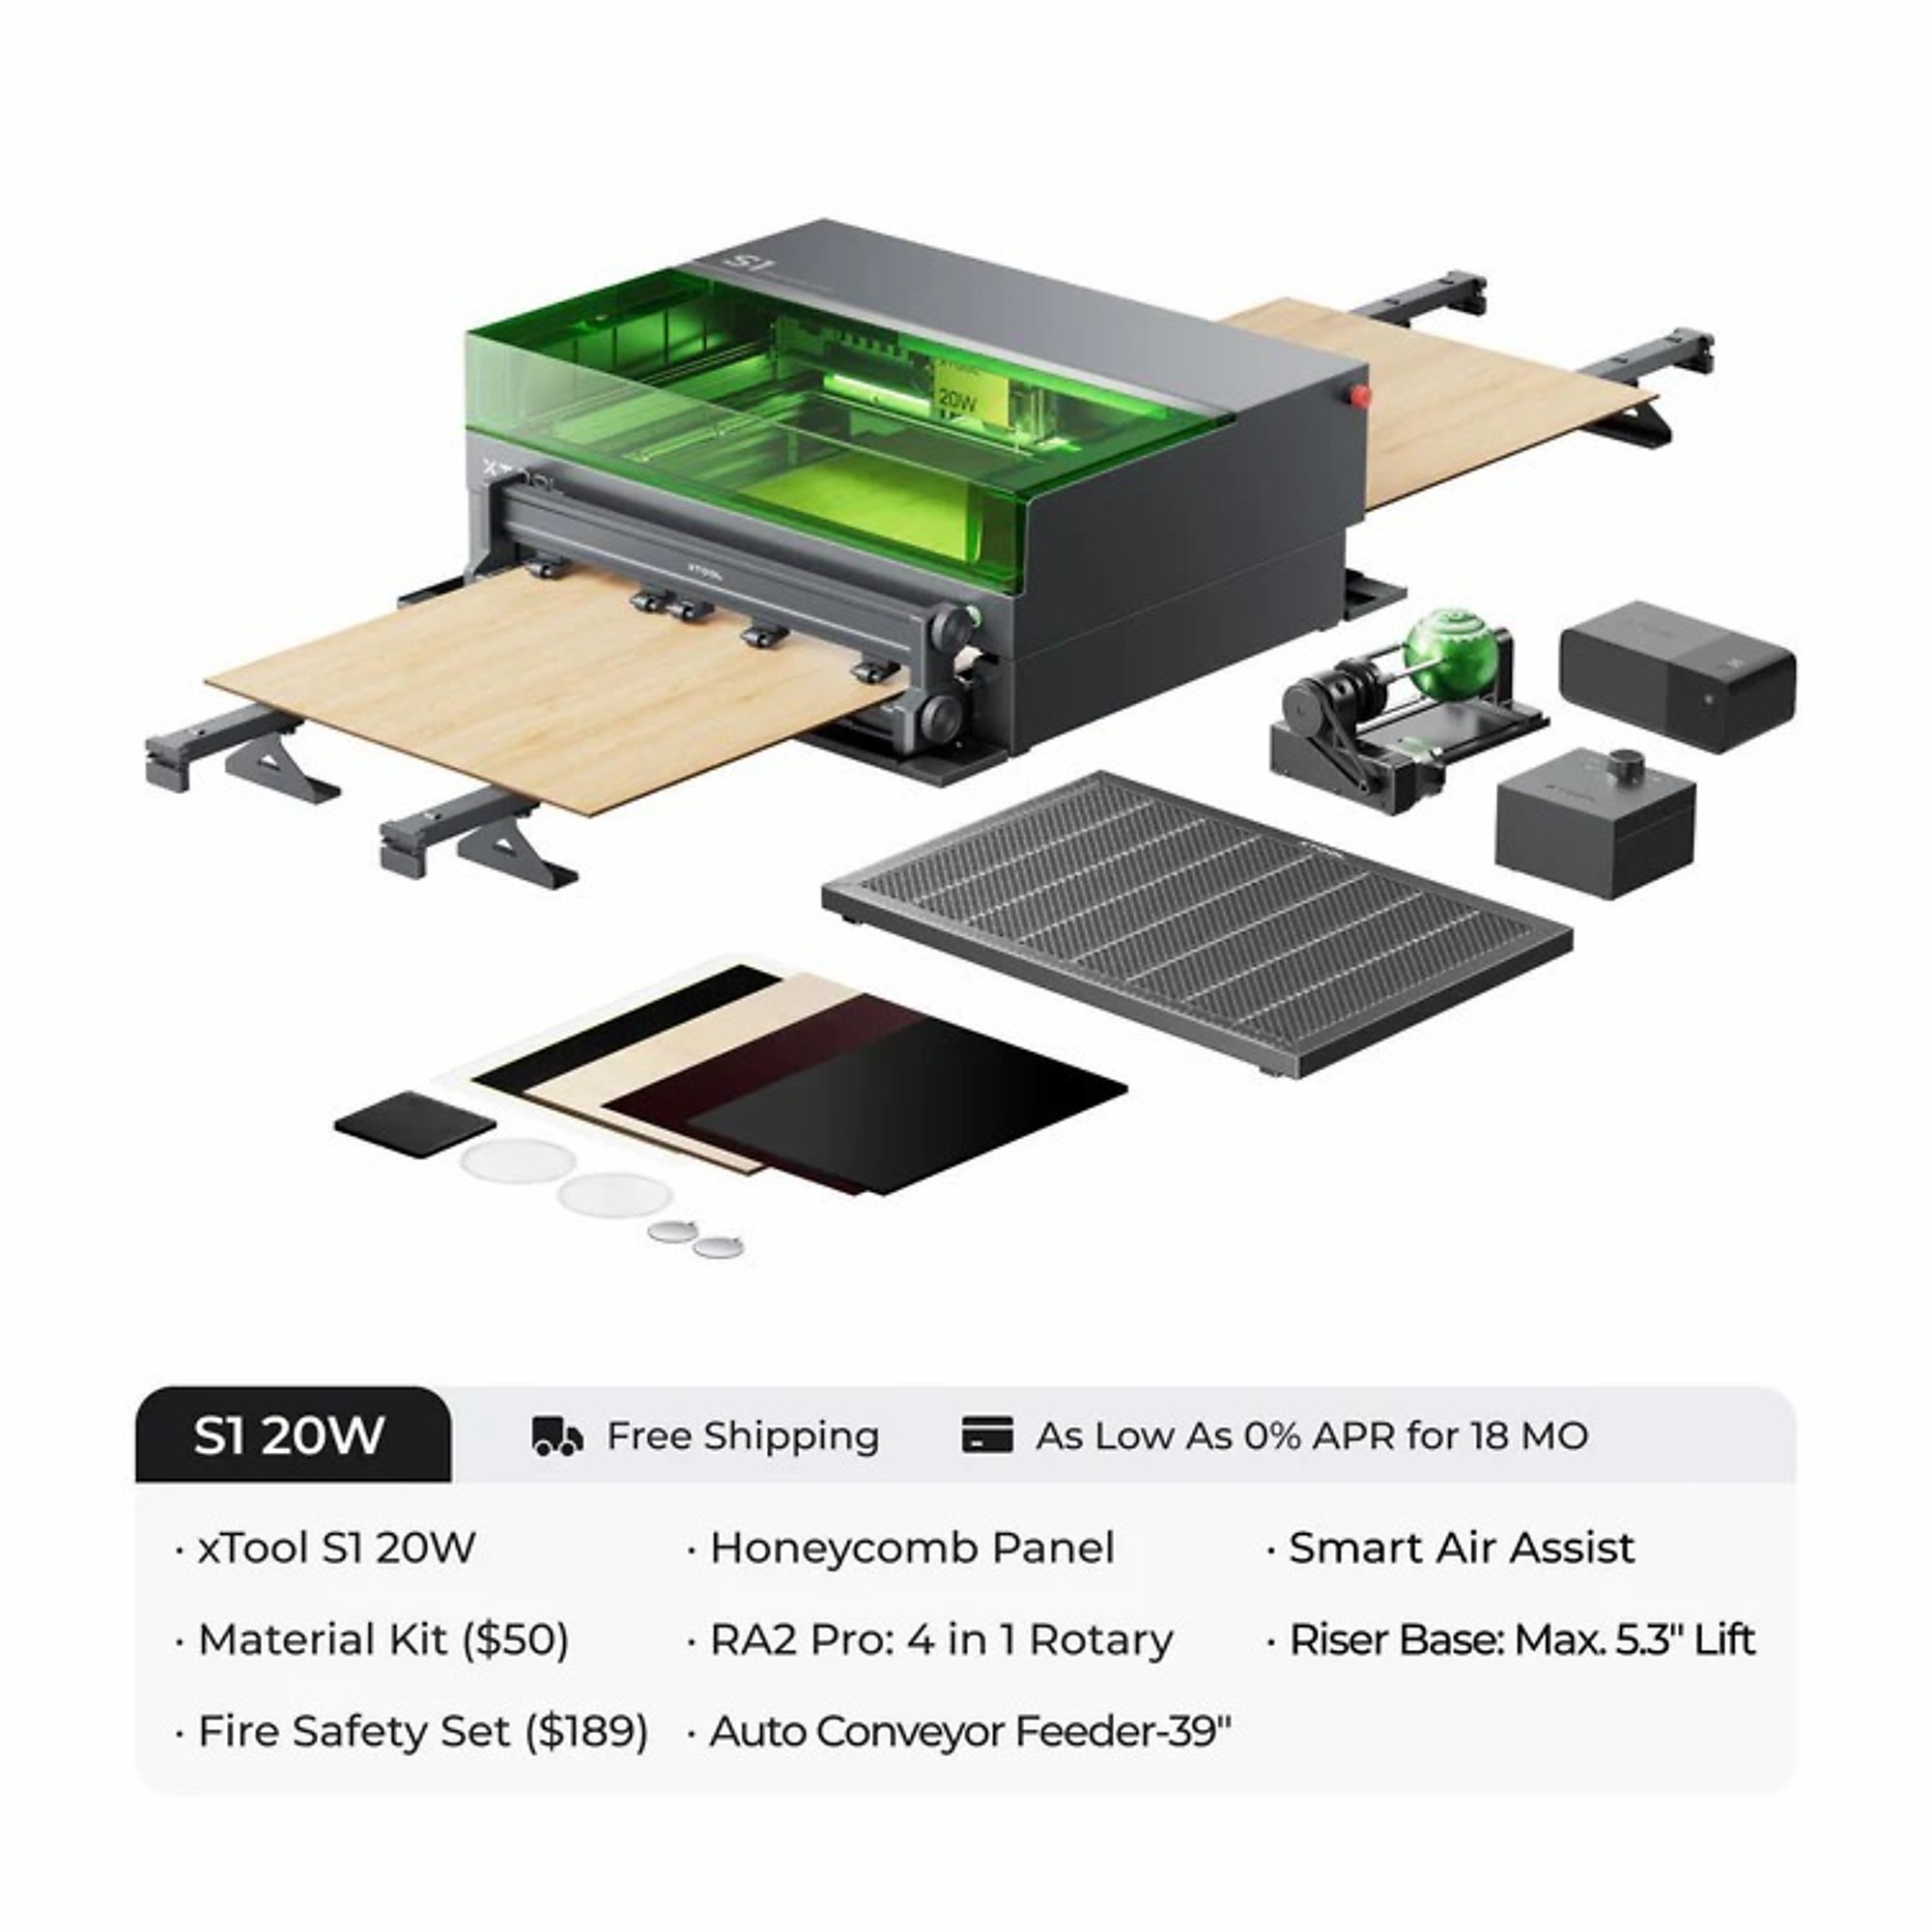 xTool, Laser Cutter and Engraver S1 20w, 600mm/s,, Working Width 25.98 in, Working Length 33.86 in, Laser Power 20 W, Model P1030503-P5010290-P5010279